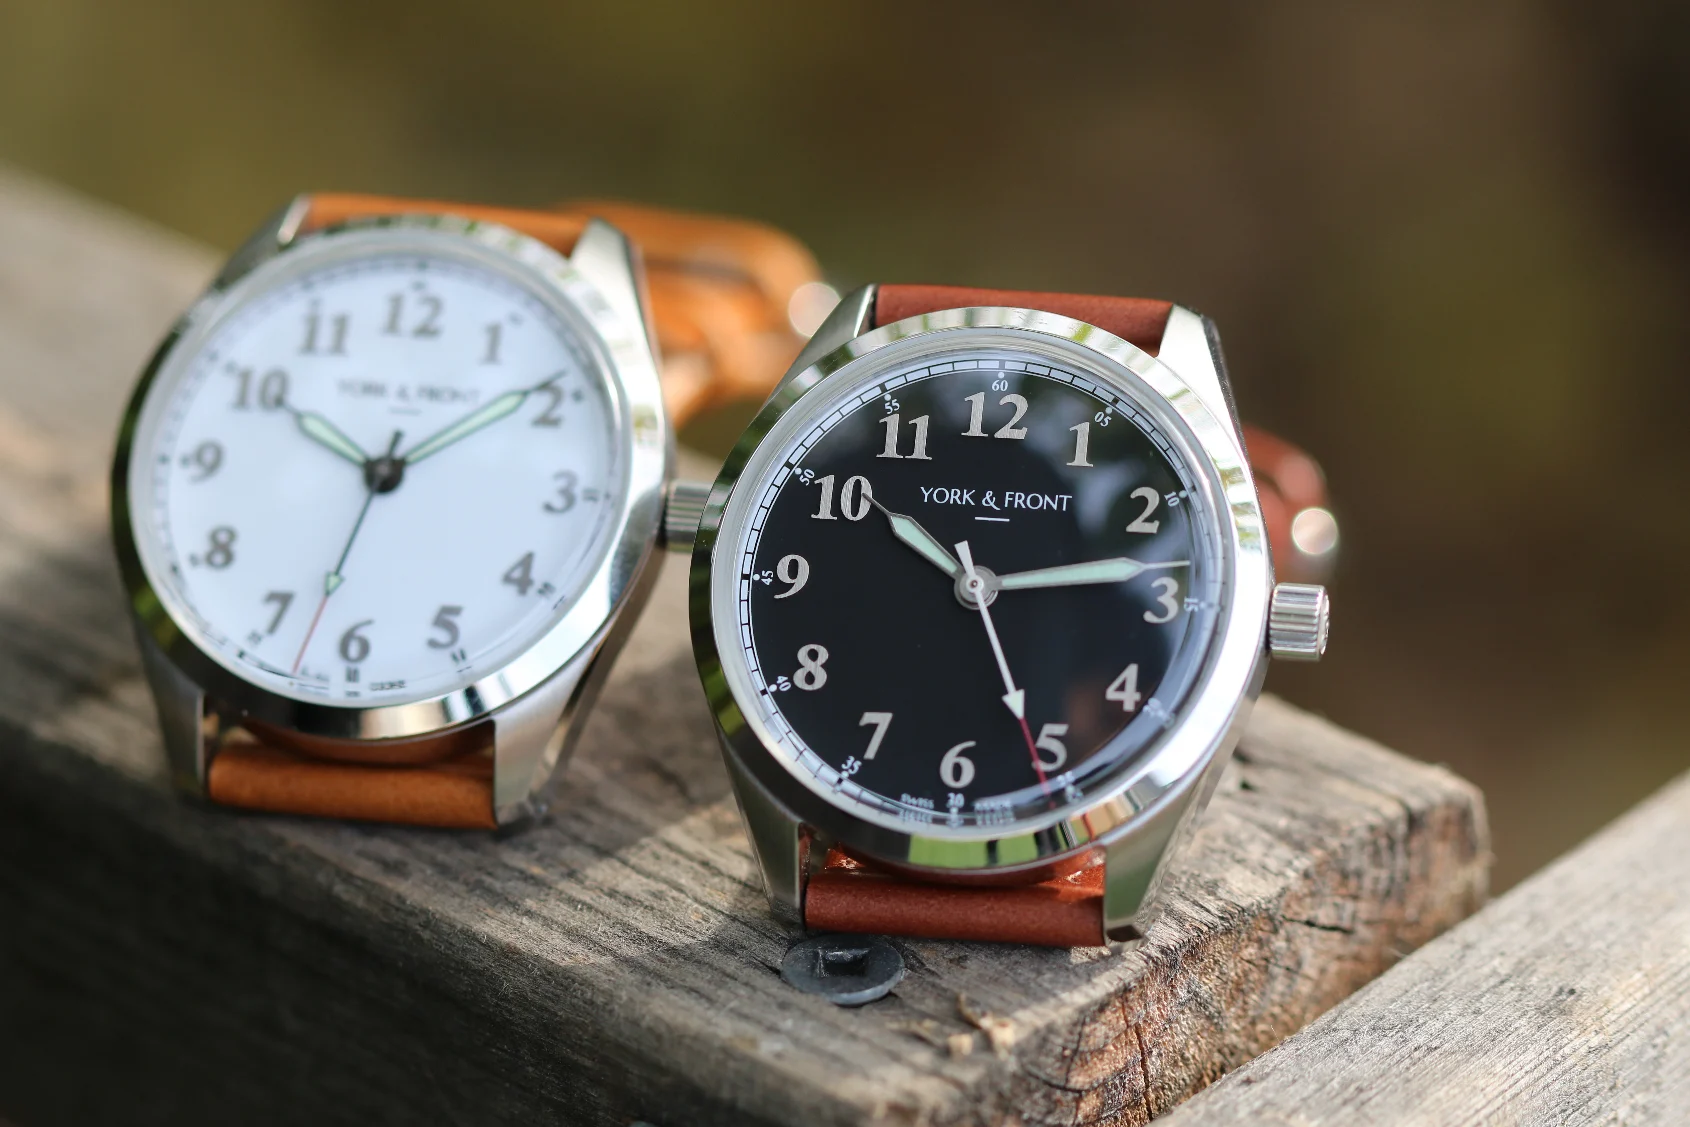 MICRO MONDAYS: The York & Front Burrard combines military vintage with contemporary style